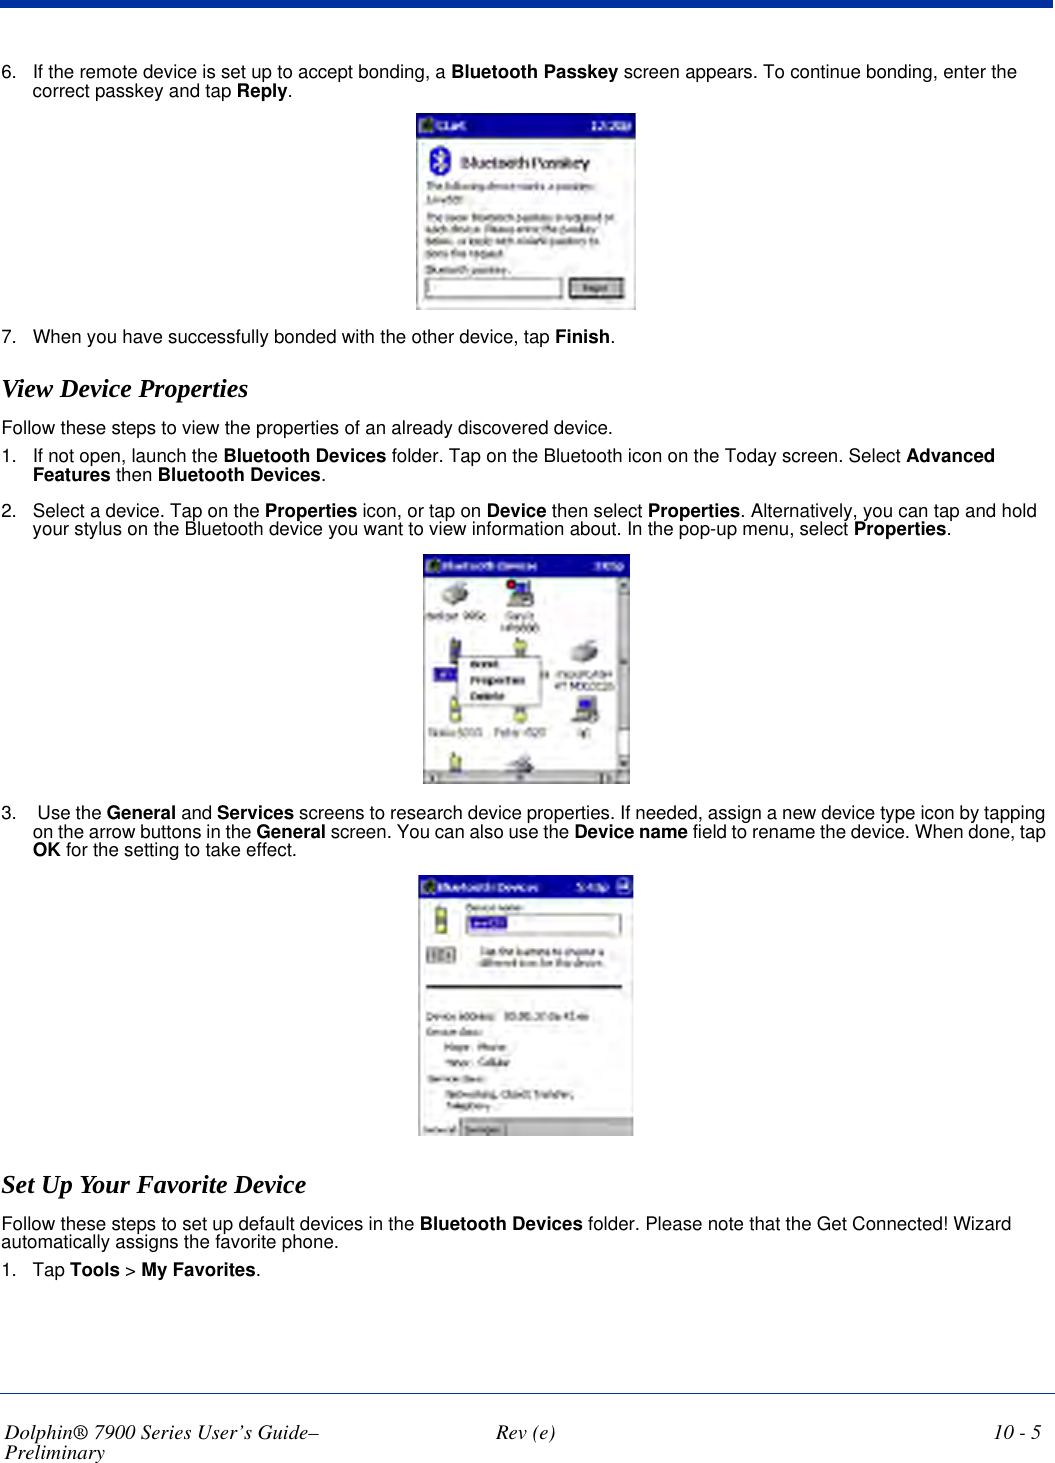 Dolphin® 7900 Series User’s Guide–Preliminary  Rev (e) 10 - 56. If the remote device is set up to accept bonding, a Bluetooth Passkey screen appears. To continue bonding, enter the correct passkey and tap Reply.7. When you have successfully bonded with the other device, tap Finish.View Device PropertiesFollow these steps to view the properties of an already discovered device. 1. If not open, launch the Bluetooth Devices folder. Tap on the Bluetooth icon on the Today screen. Select Advanced Features then Bluetooth Devices.2. Select a device. Tap on the Properties icon, or tap on Device then select Properties. Alternatively, you can tap and hold your stylus on the Bluetooth device you want to view information about. In the pop-up menu, select Properties.3.  Use the General and Services screens to research device properties. If needed, assign a new device type icon by tapping on the arrow buttons in the General screen. You can also use the Device name field to rename the device. When done, tap OK for the setting to take effect.Set Up Your Favorite DeviceFollow these steps to set up default devices in the Bluetooth Devices folder. Please note that the Get Connected! Wizard automatically assigns the favorite phone.1. Tap Tools &gt; My Favorites. 